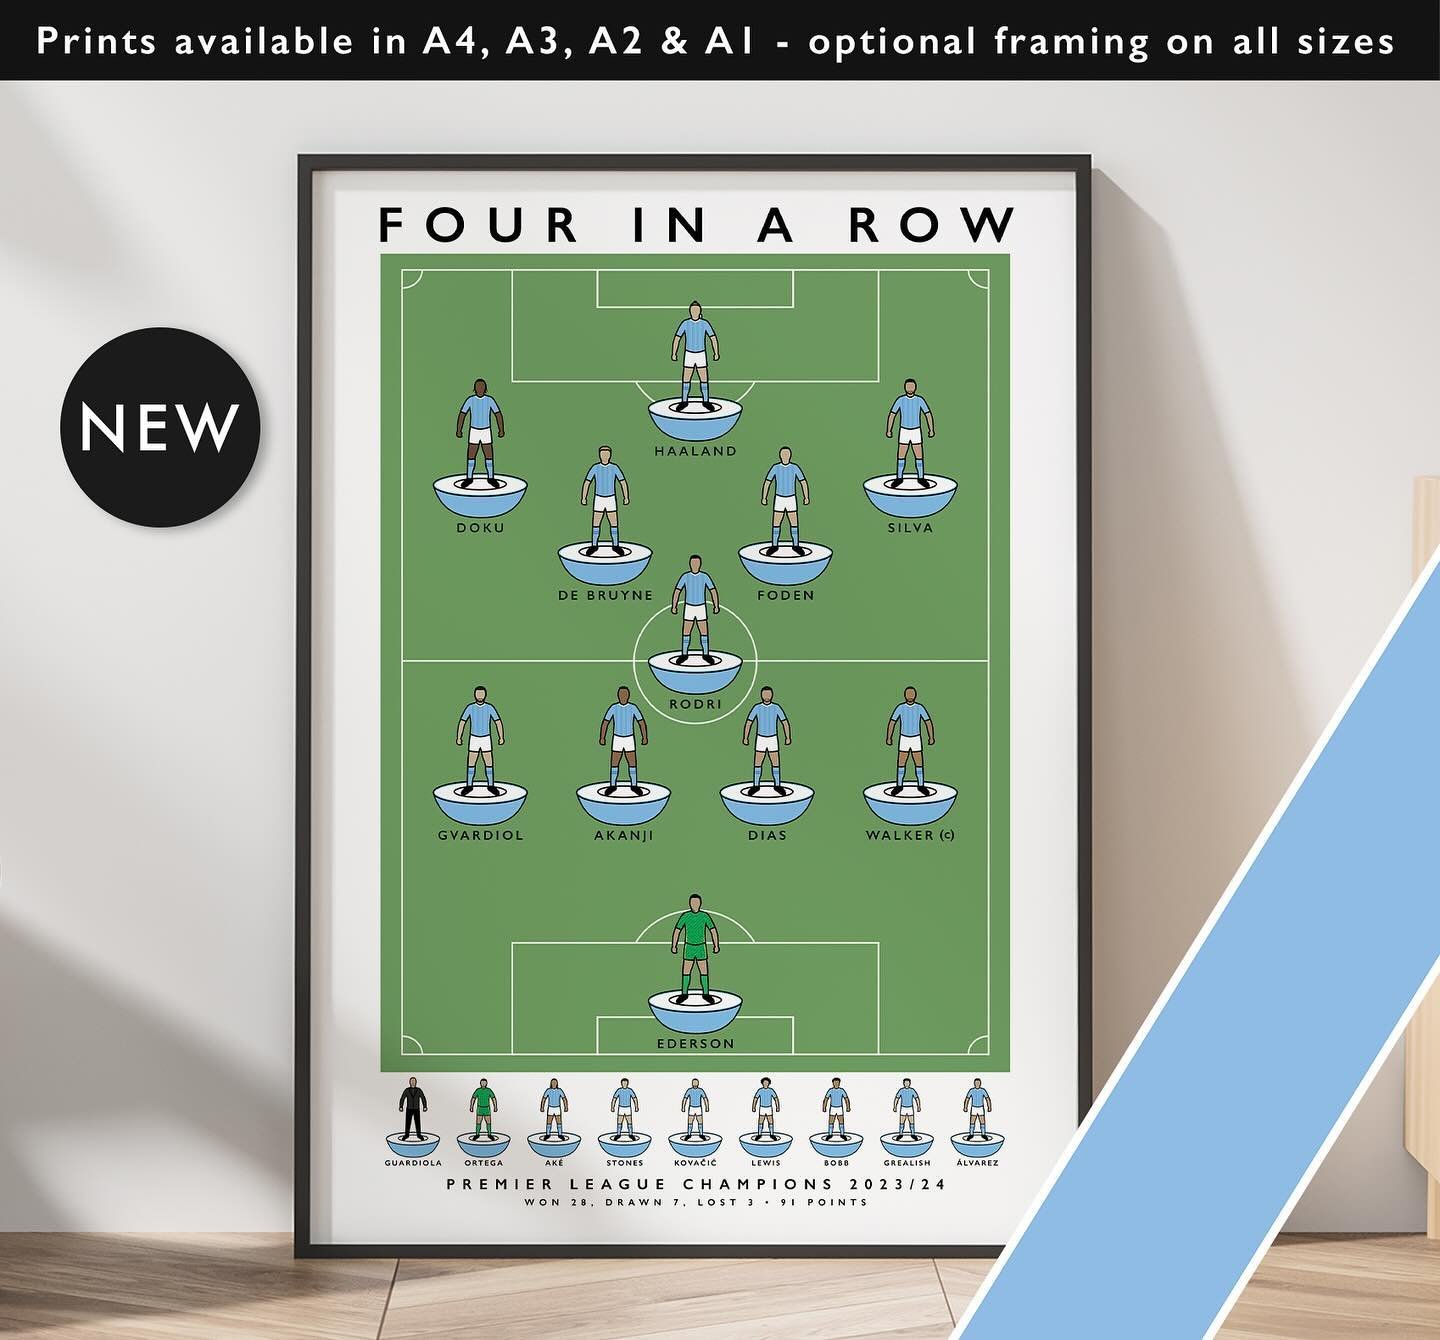 NEW: Manchester City Four In A Row 

Get 10% off until midnight with the discount code 
FOUR-IN-A-ROW 

Shop now: matthewjiwood.com/subbuteo-xis/m&hellip;

Prints available in A4, A3, A2 &amp; A1 with optional framing

#MCFC #ManCity #Manchester #foo